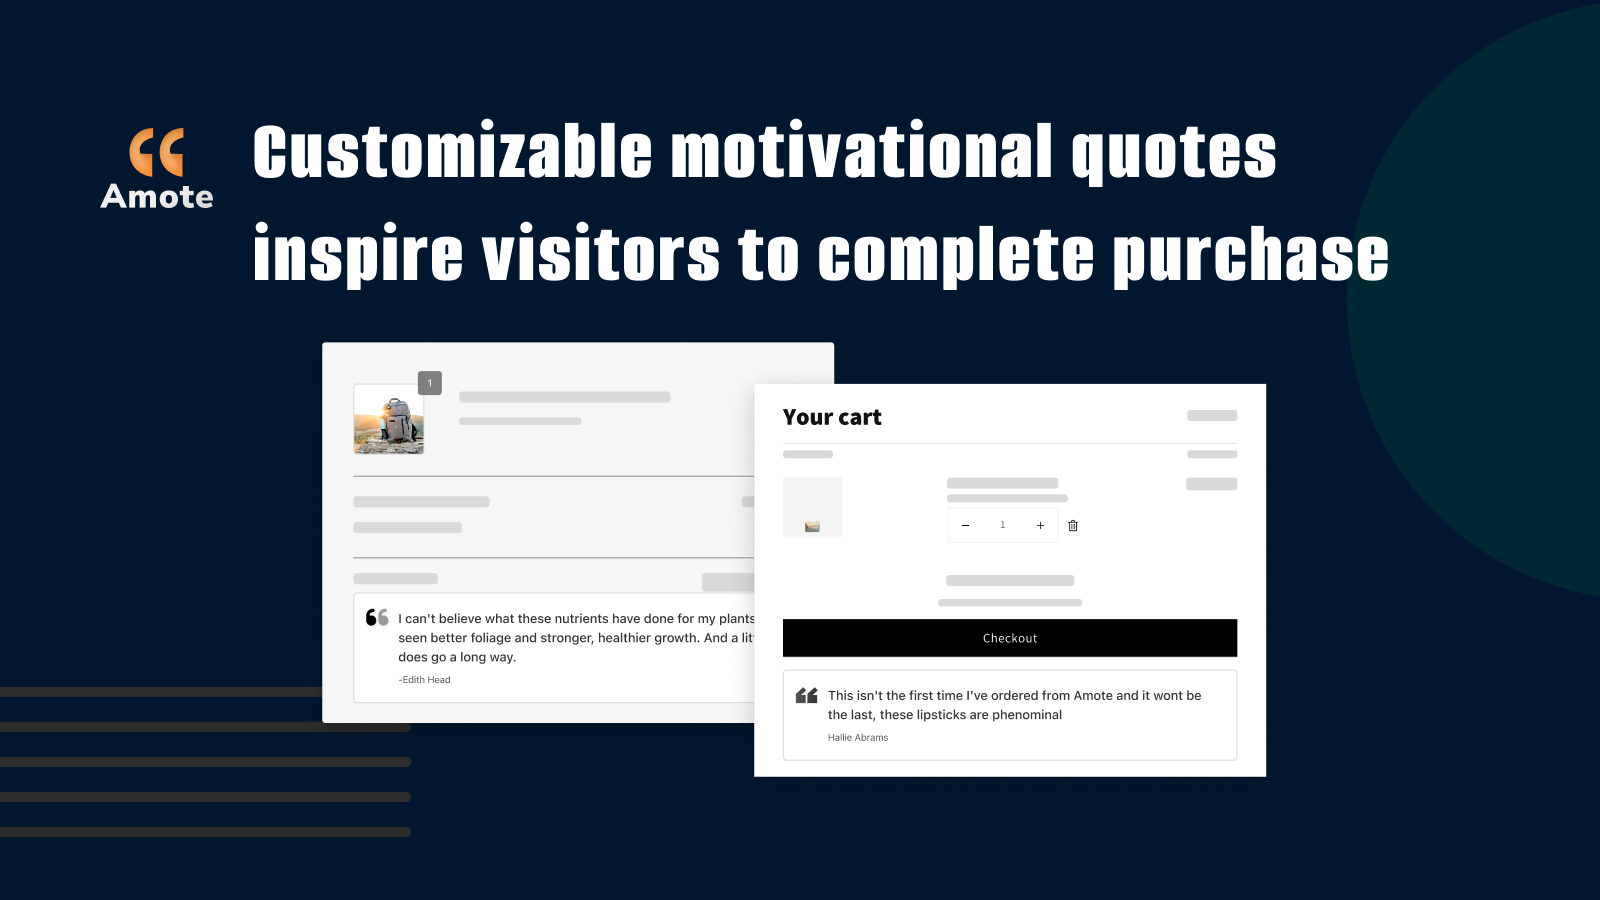 Inspirational quotes to motivate customers to complete purchase